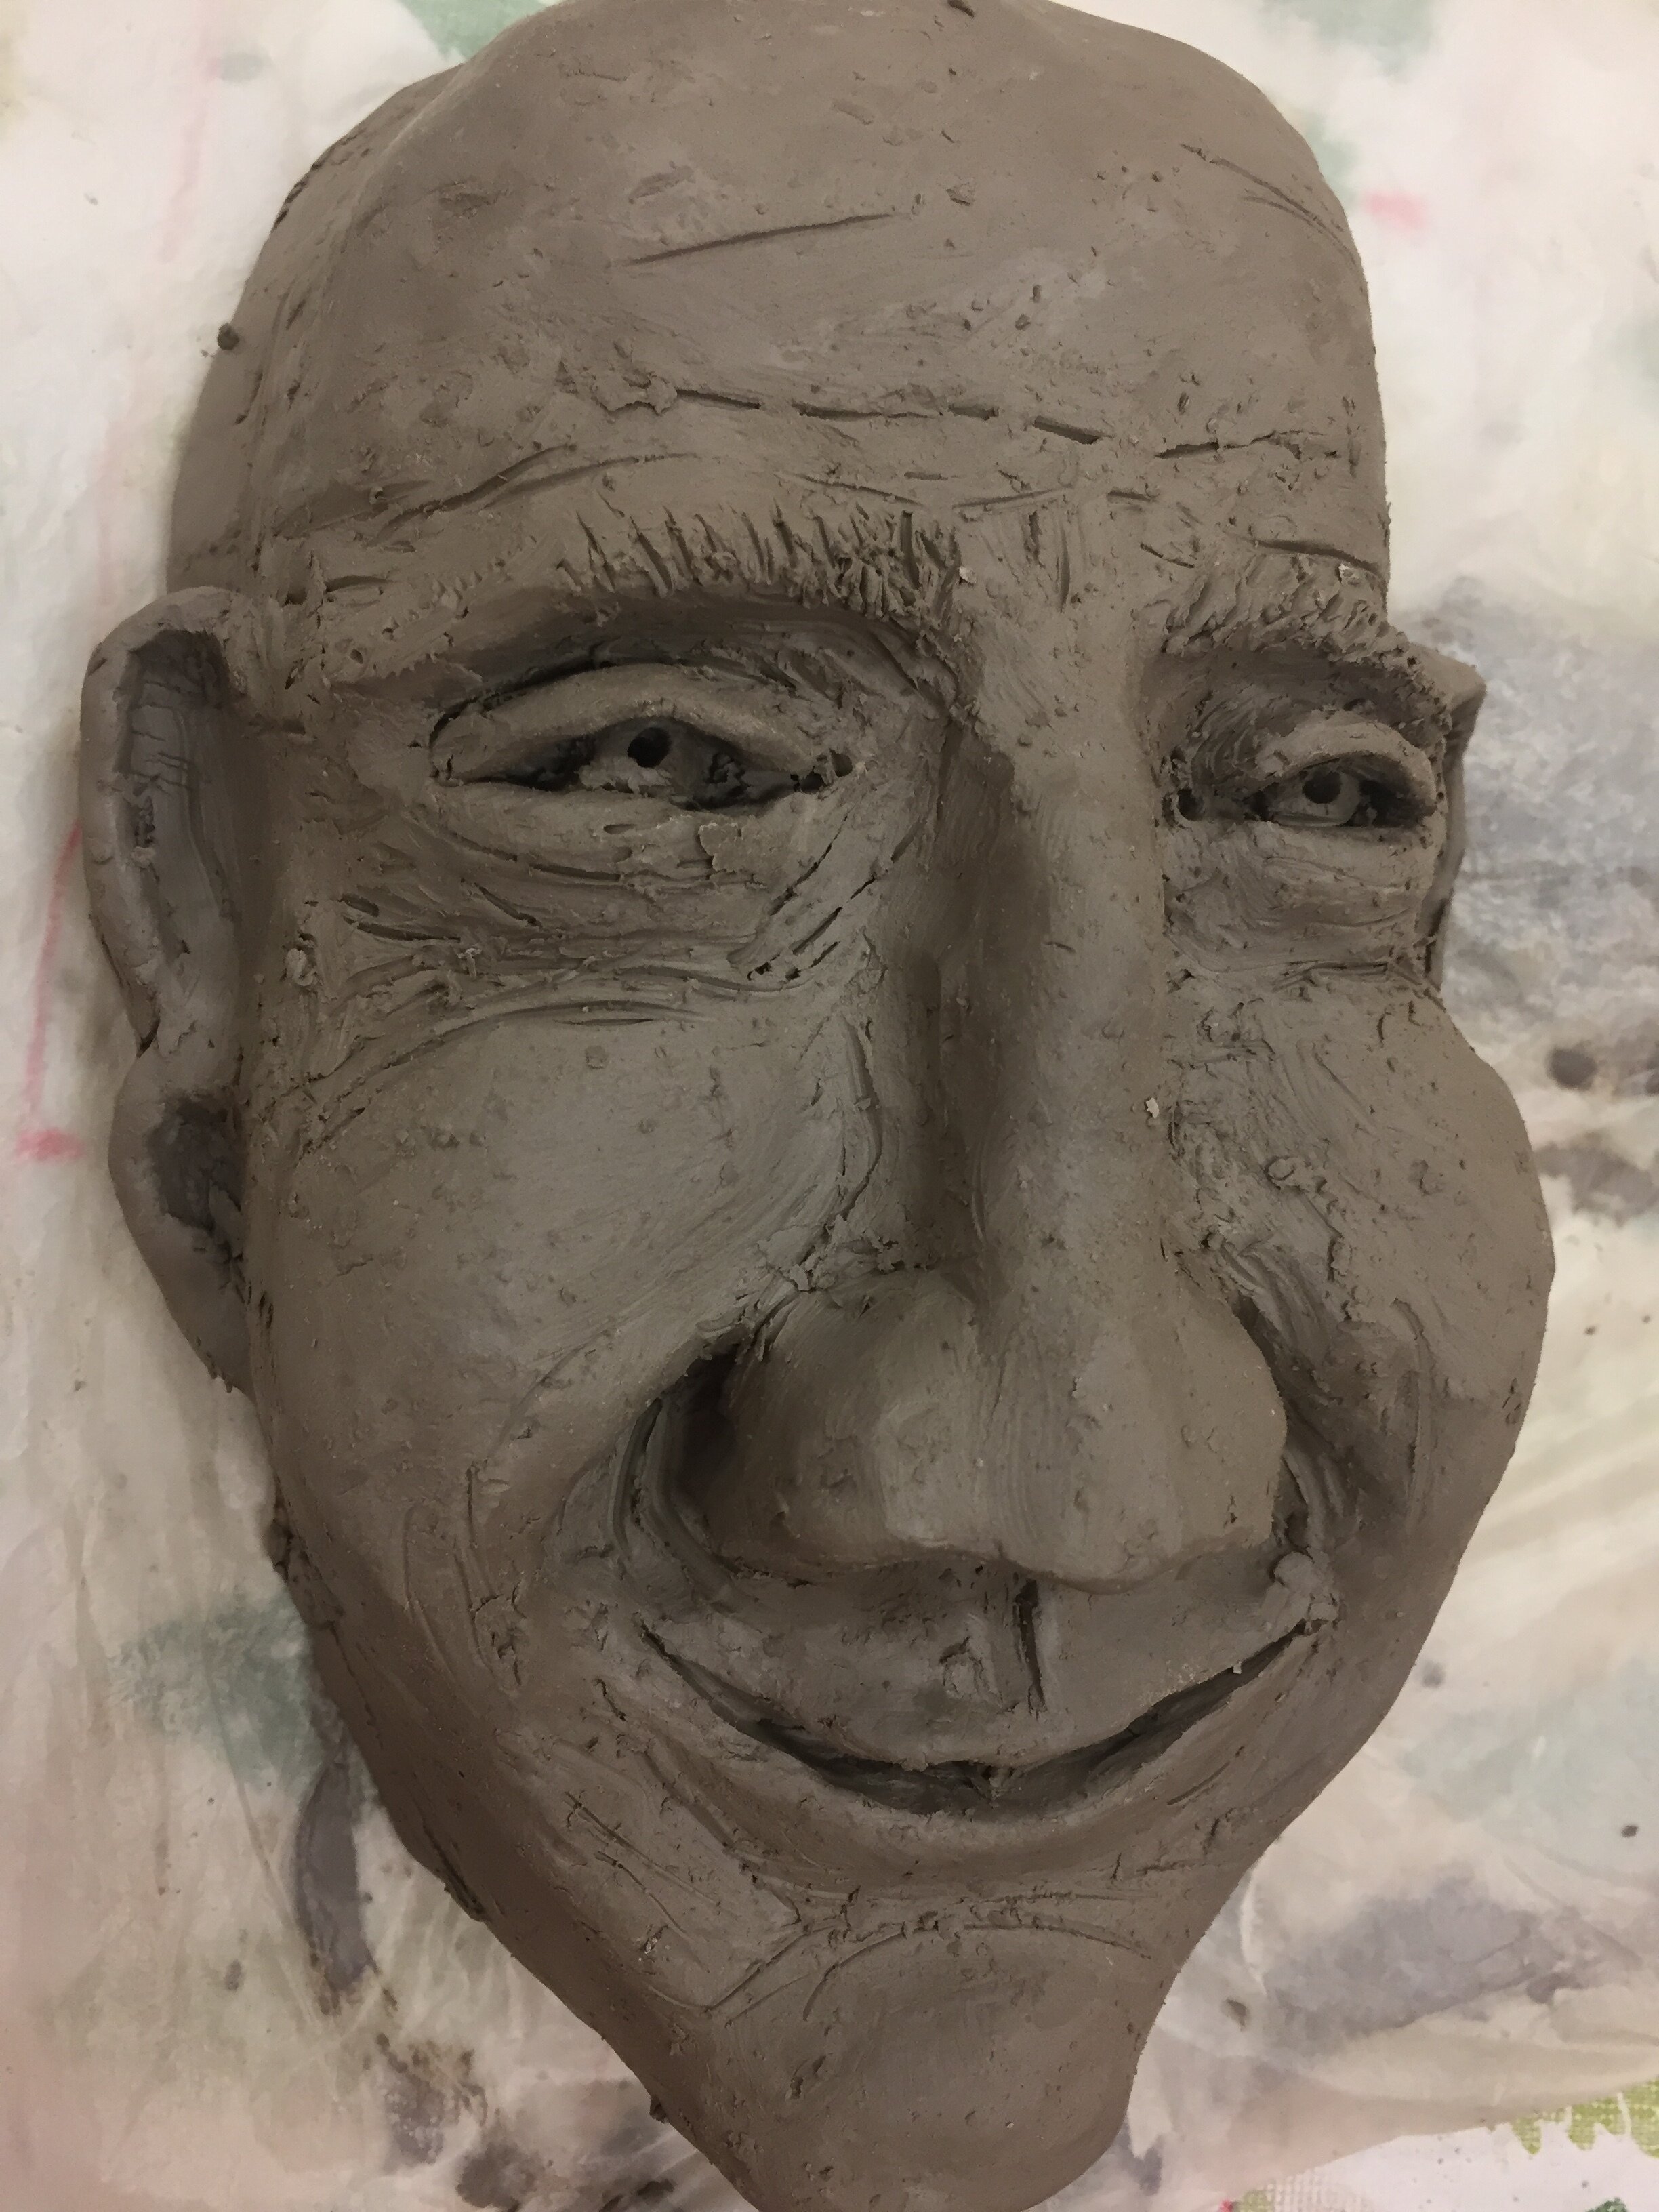 Professional Development Activity Away Day, Perth, Drawing and Clay, Happiness Facial Expression